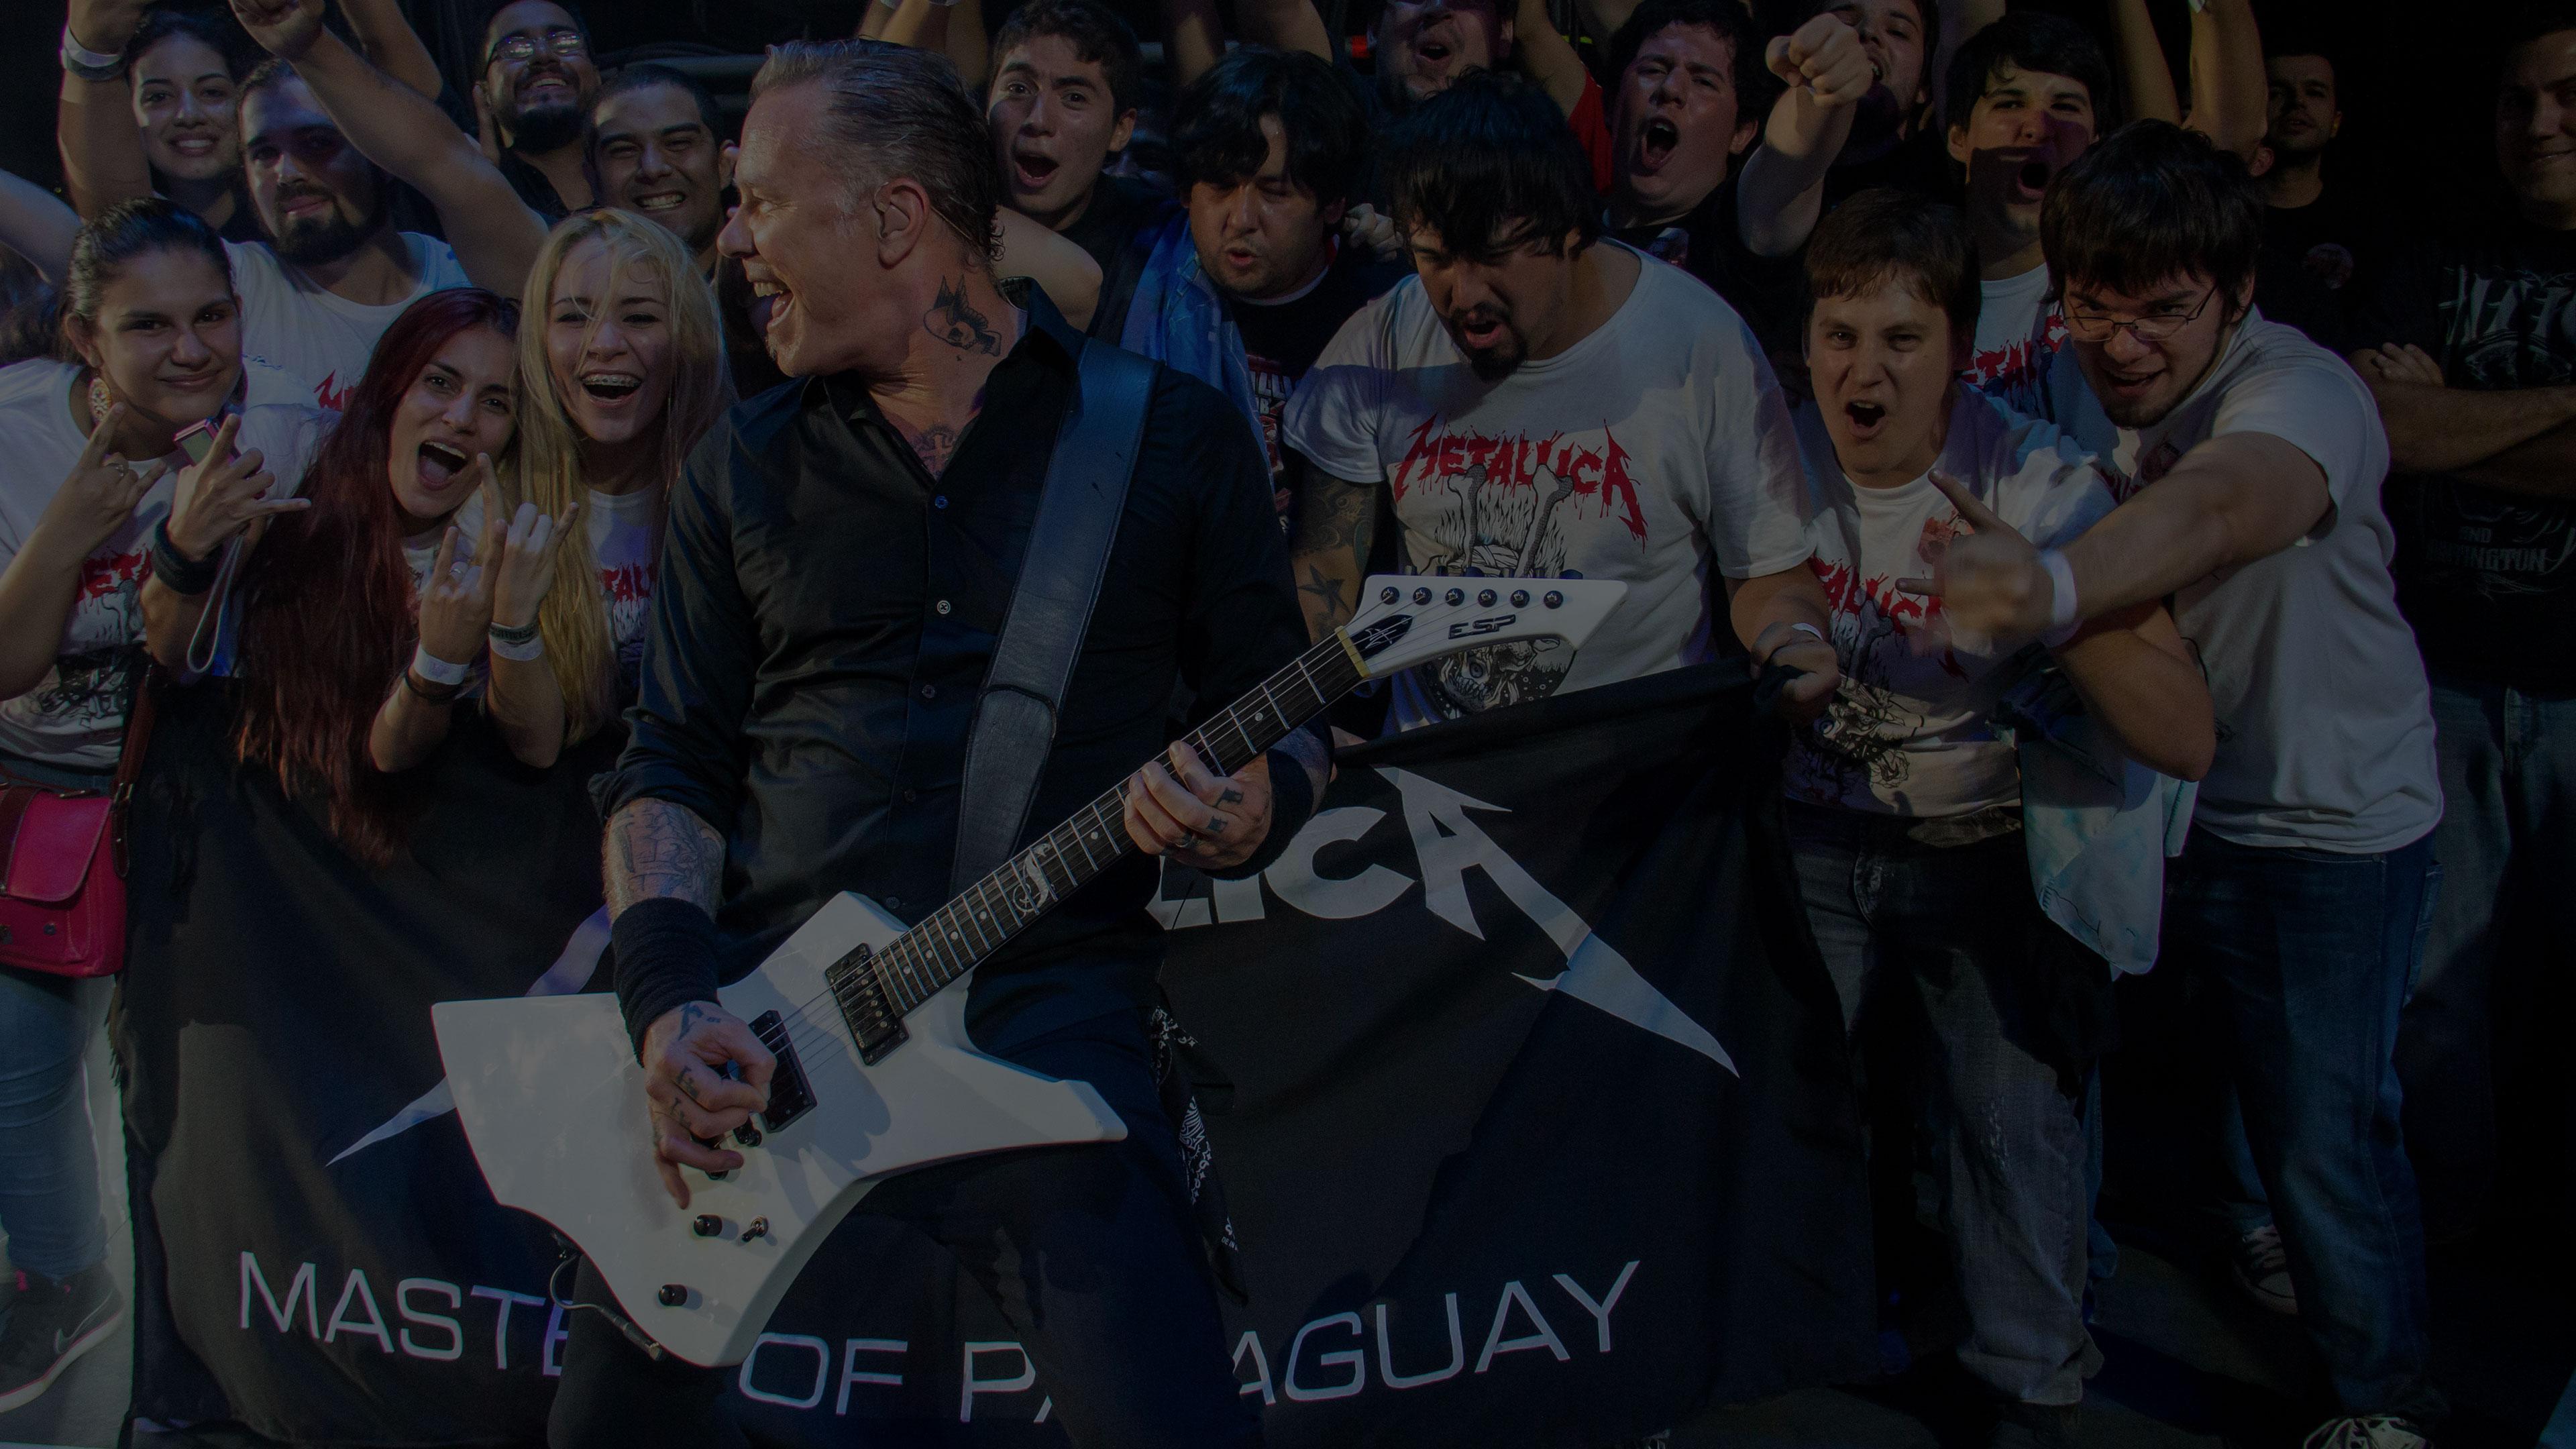 Banner Image for the photo gallery from the gig in Asunción, Paraguay shot on March 24, 2014